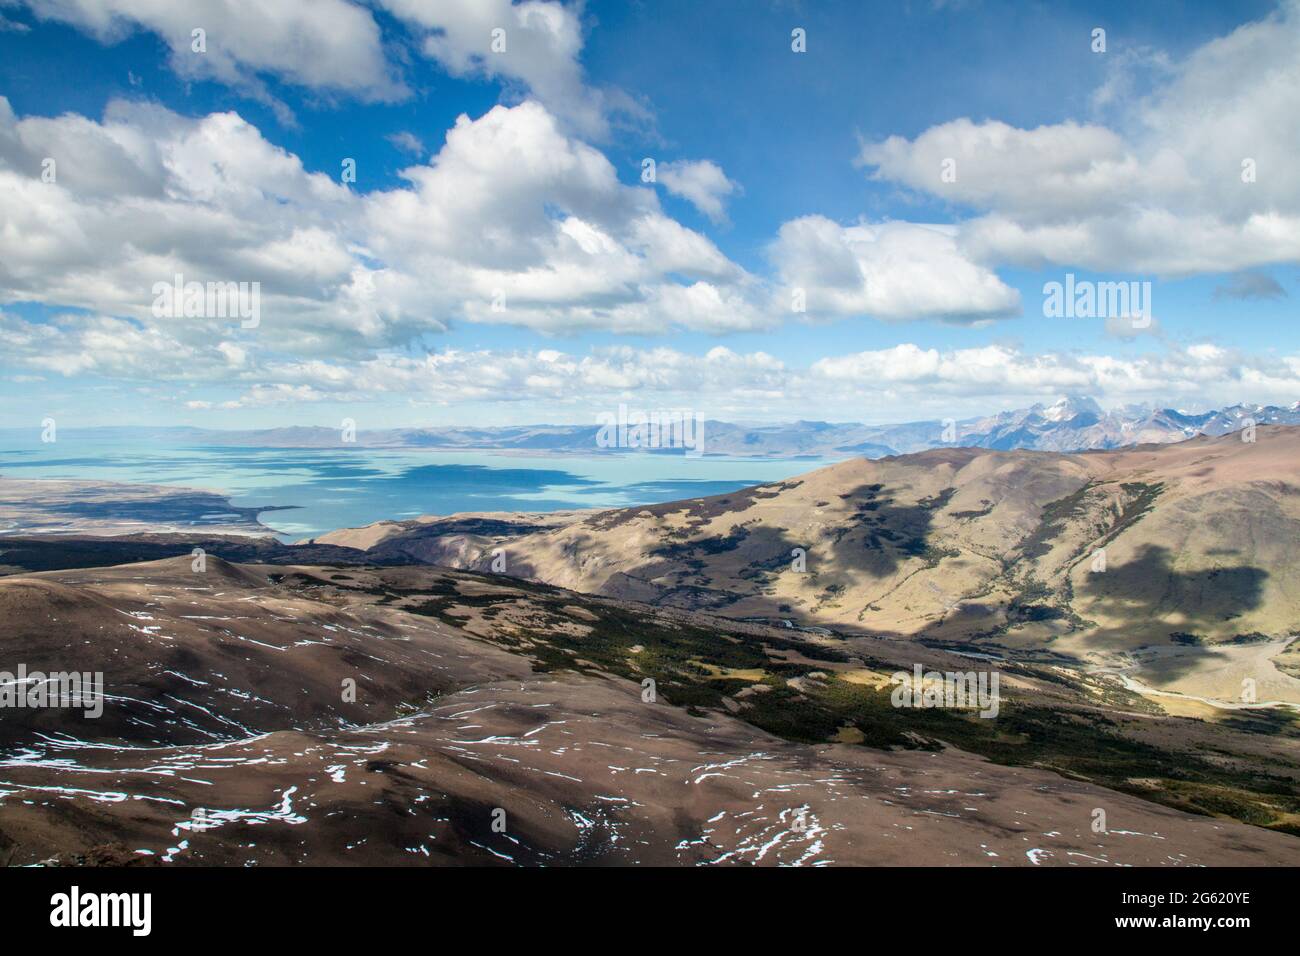 Mountains in National Park Los Glaciares, Patagonia, Argentina. Lago Viedma lake in background. Stock Photo